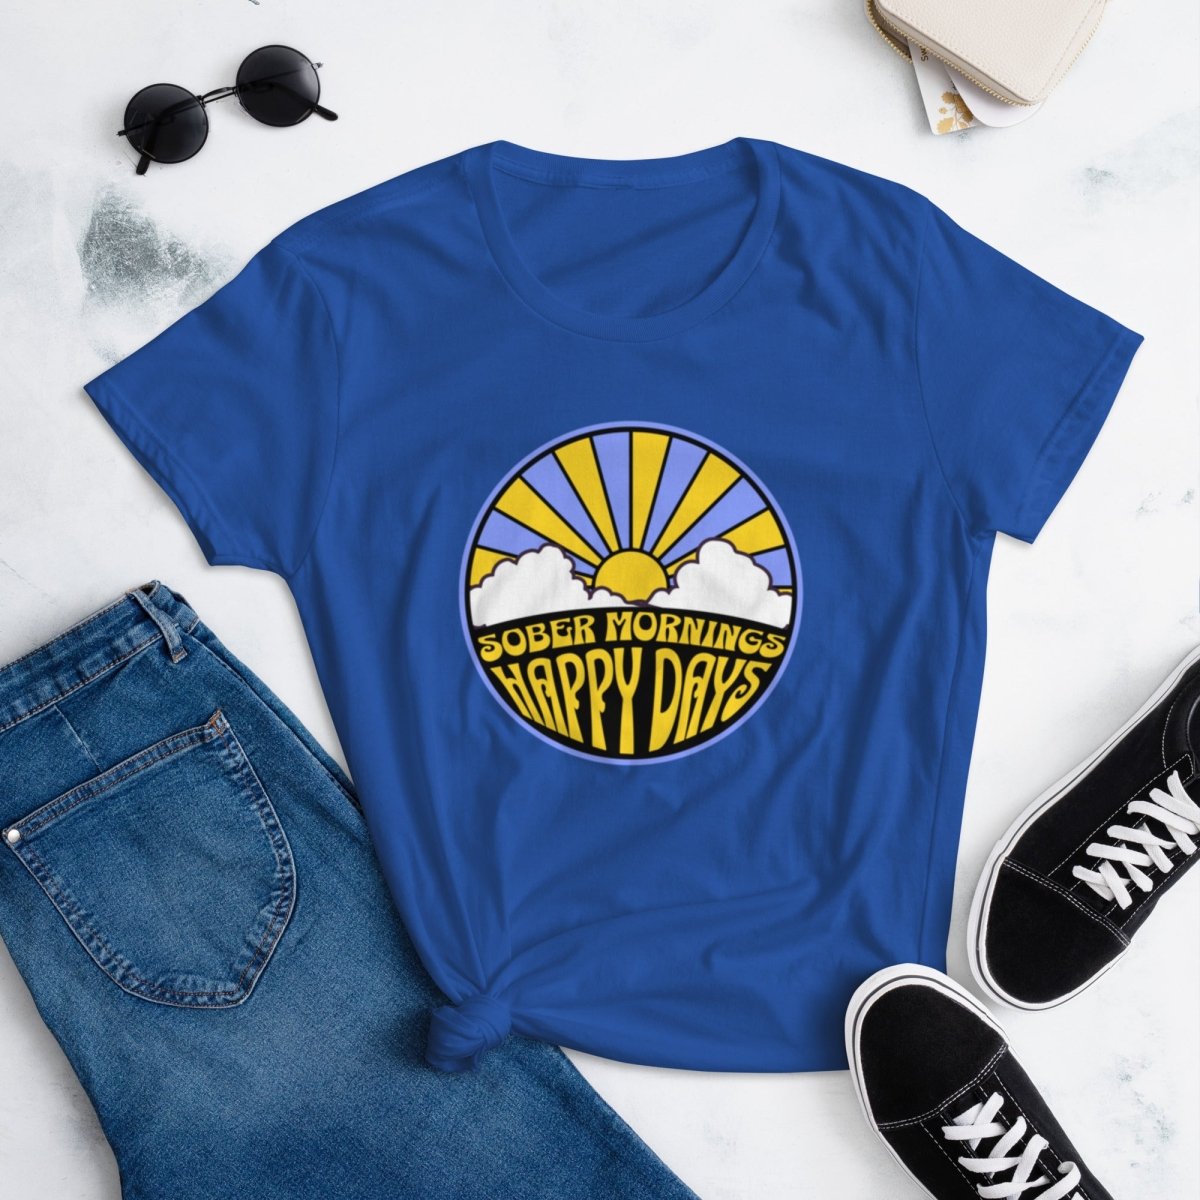 Sober Mornings Happy Days Fashion Fit Tee - Sobervation